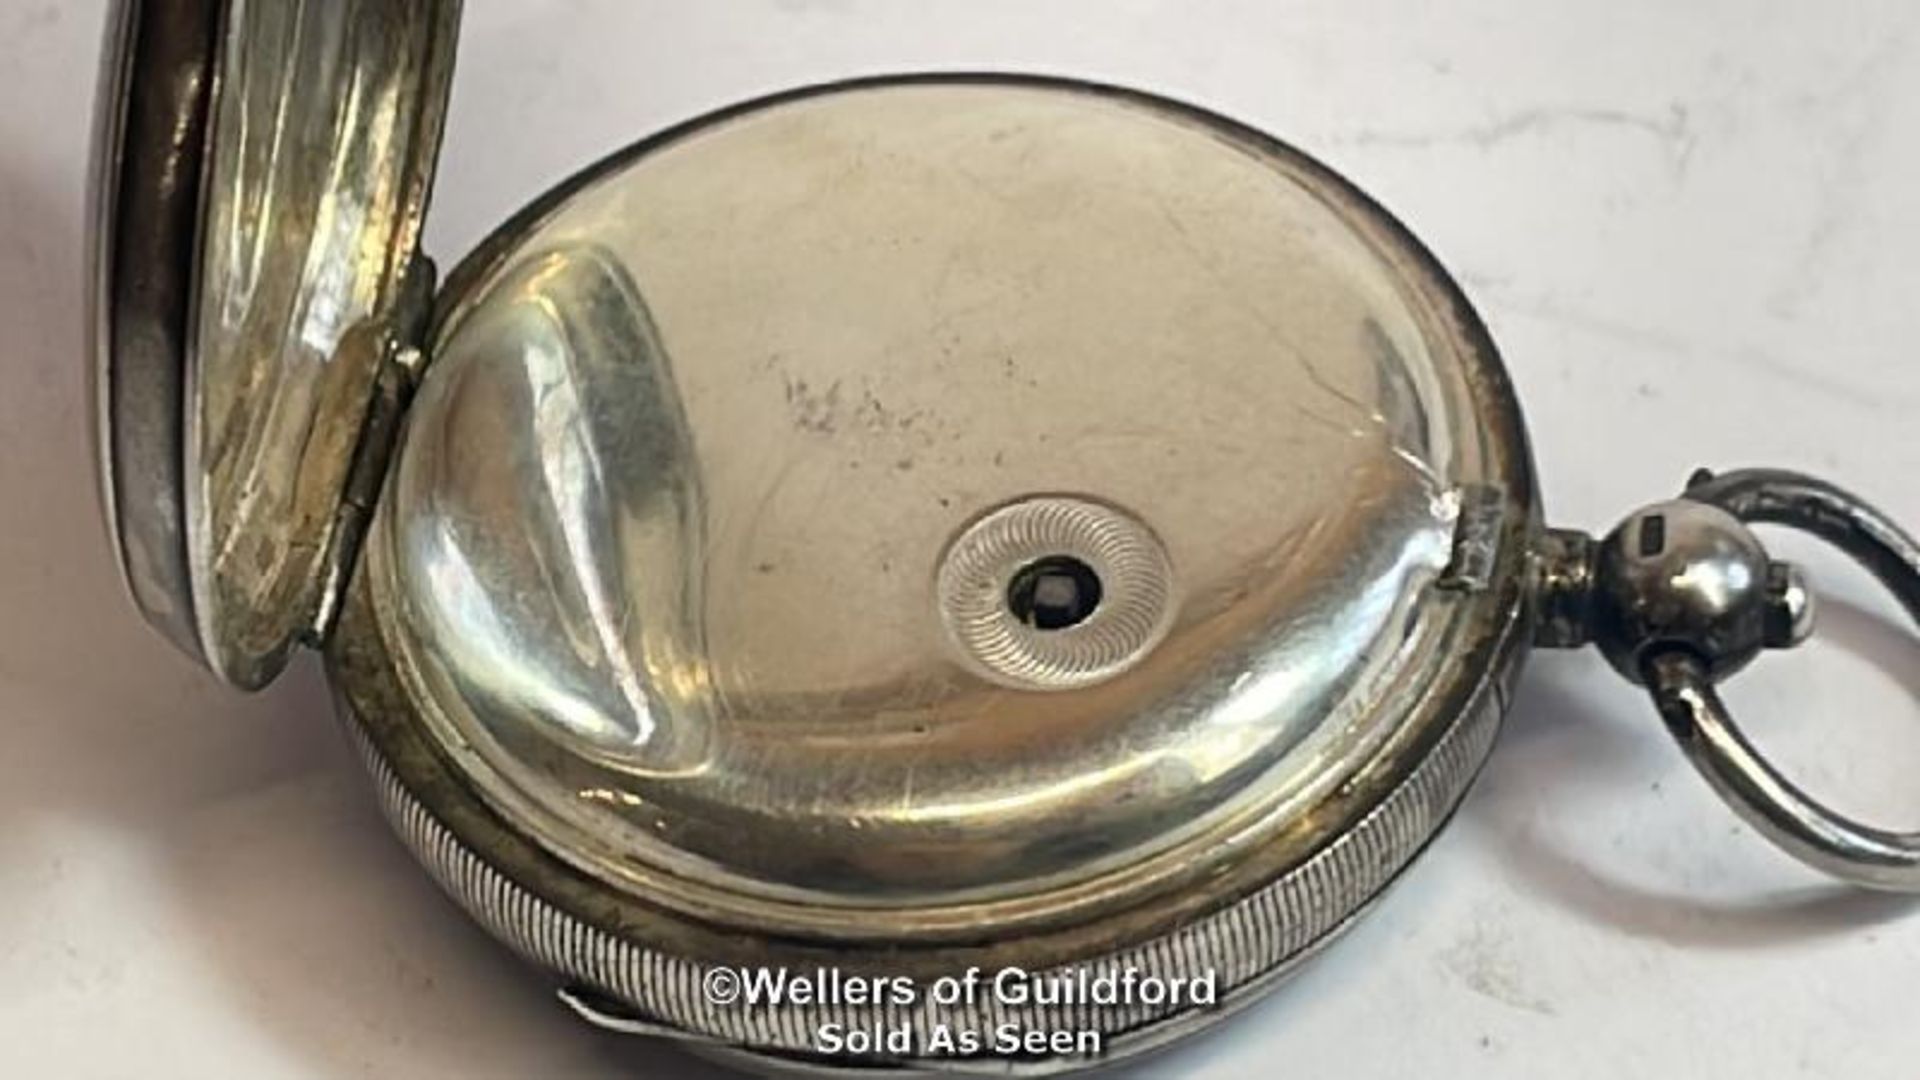 Hallmarked silver cased pocket watch "The Franklin" by John Myers & Co. Westminster Bridge Rd no. - Image 8 of 8